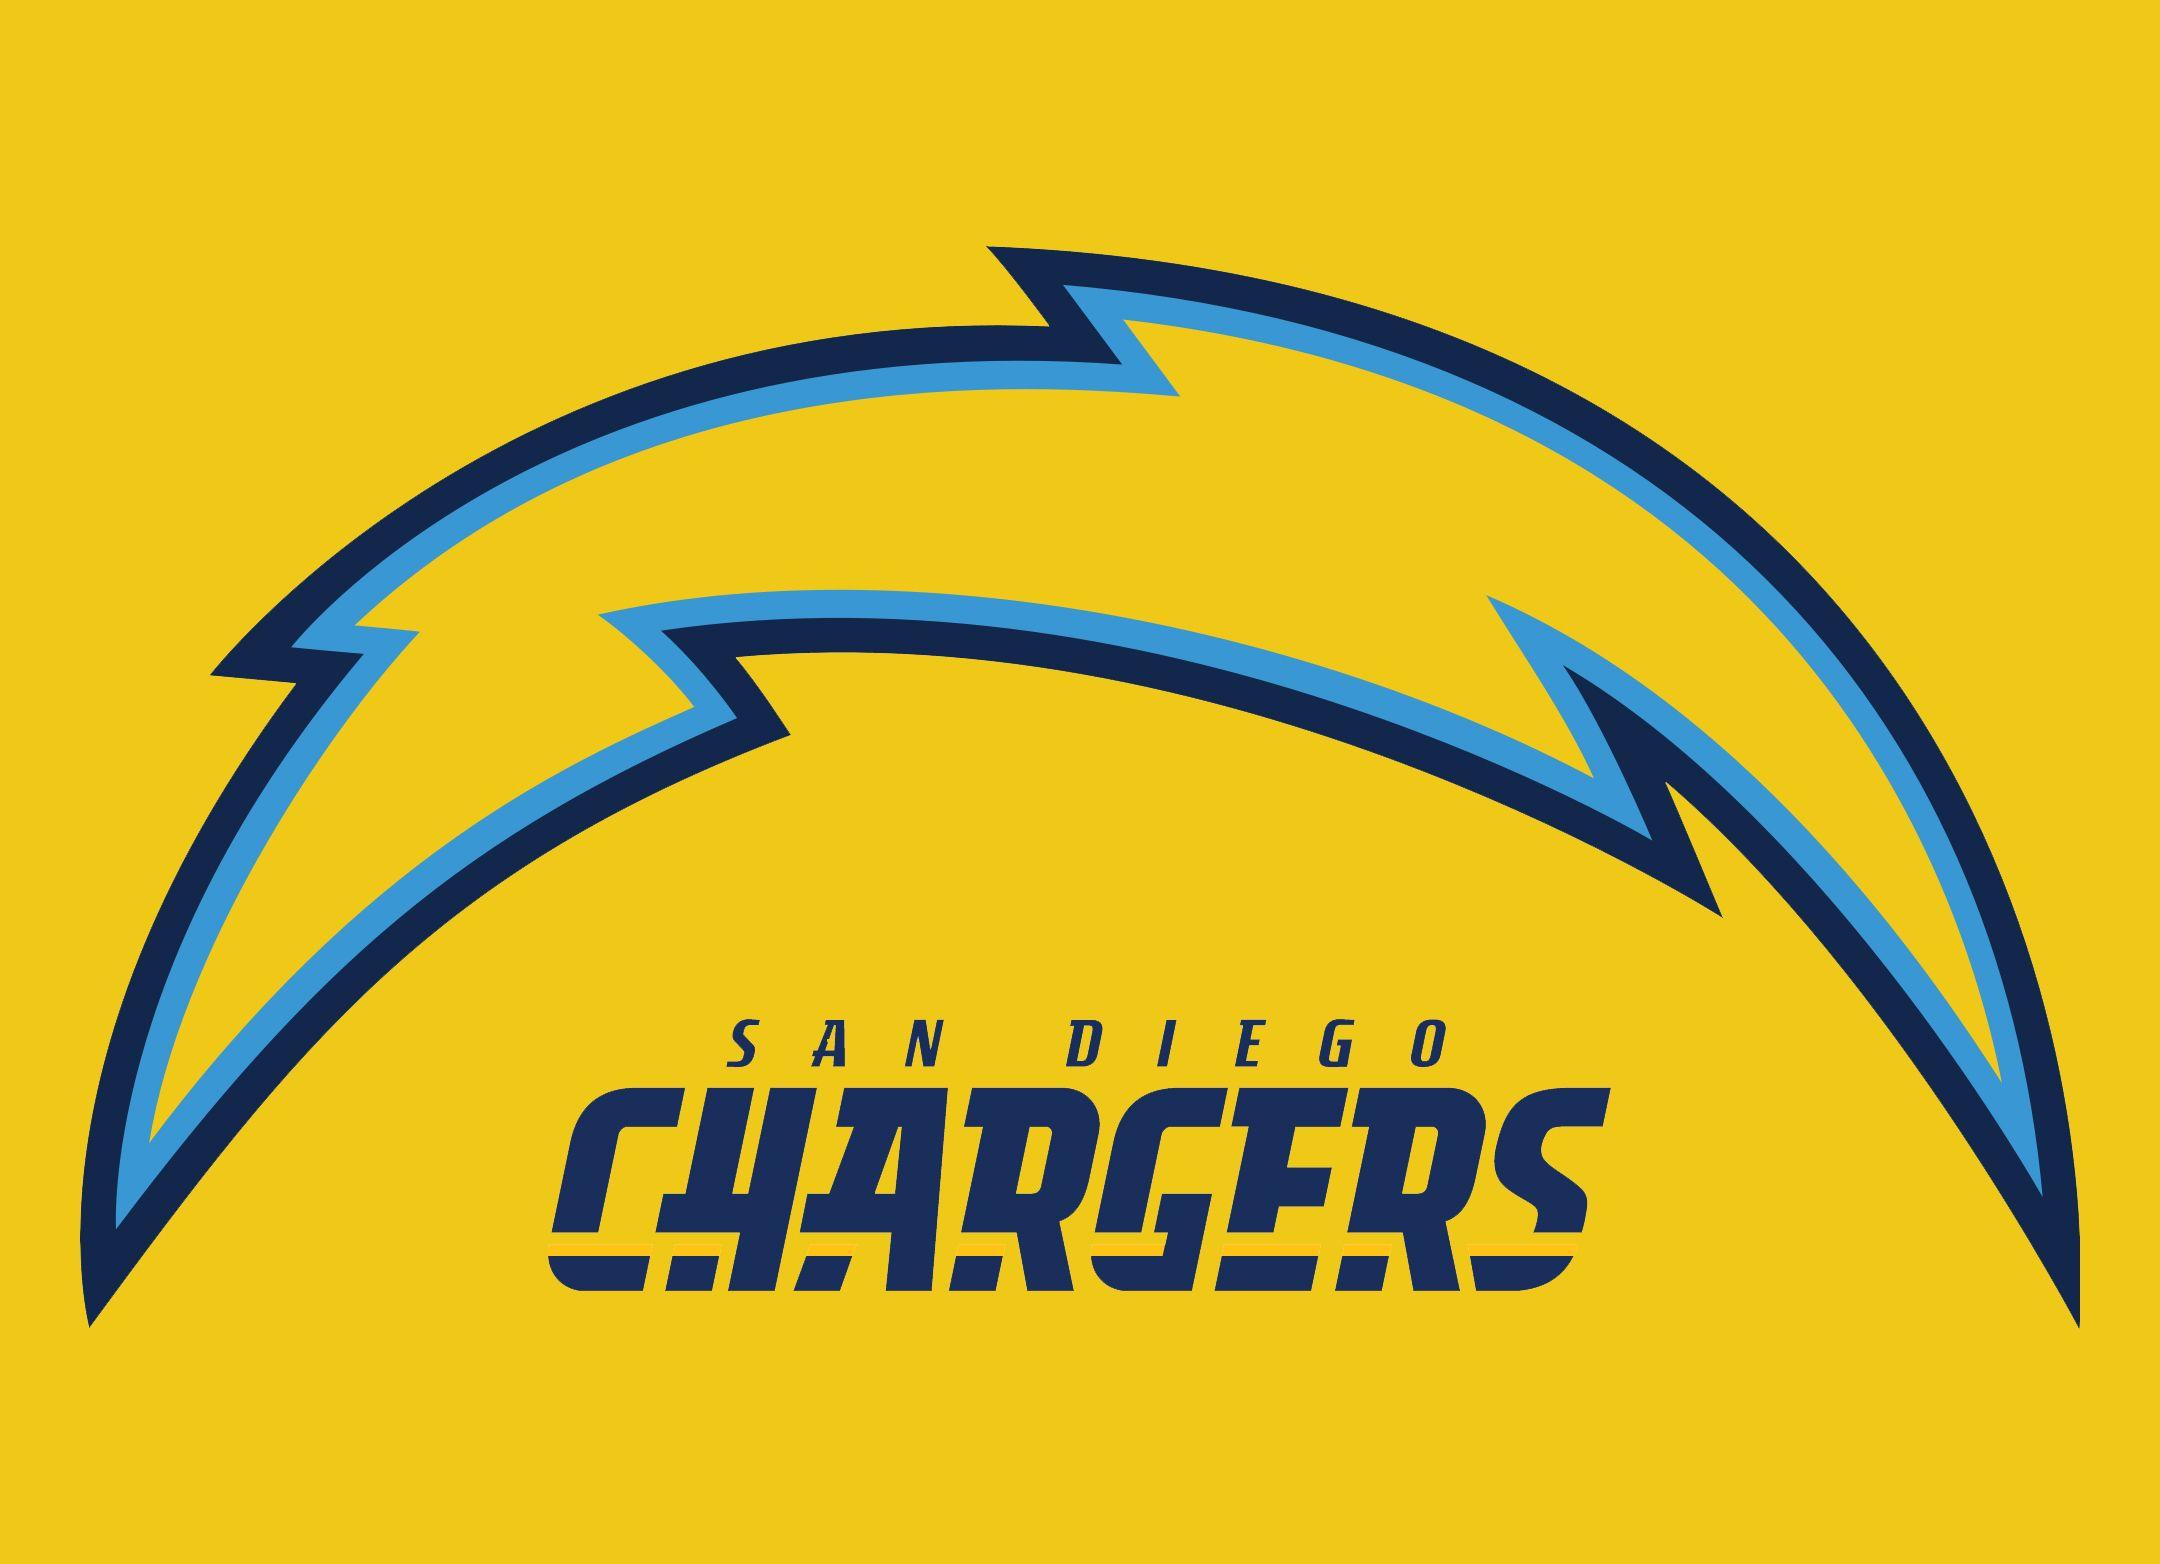 Chargers Logo - San Diego Chargers Logo, Chargers Symbol Meaning, History and Evolution